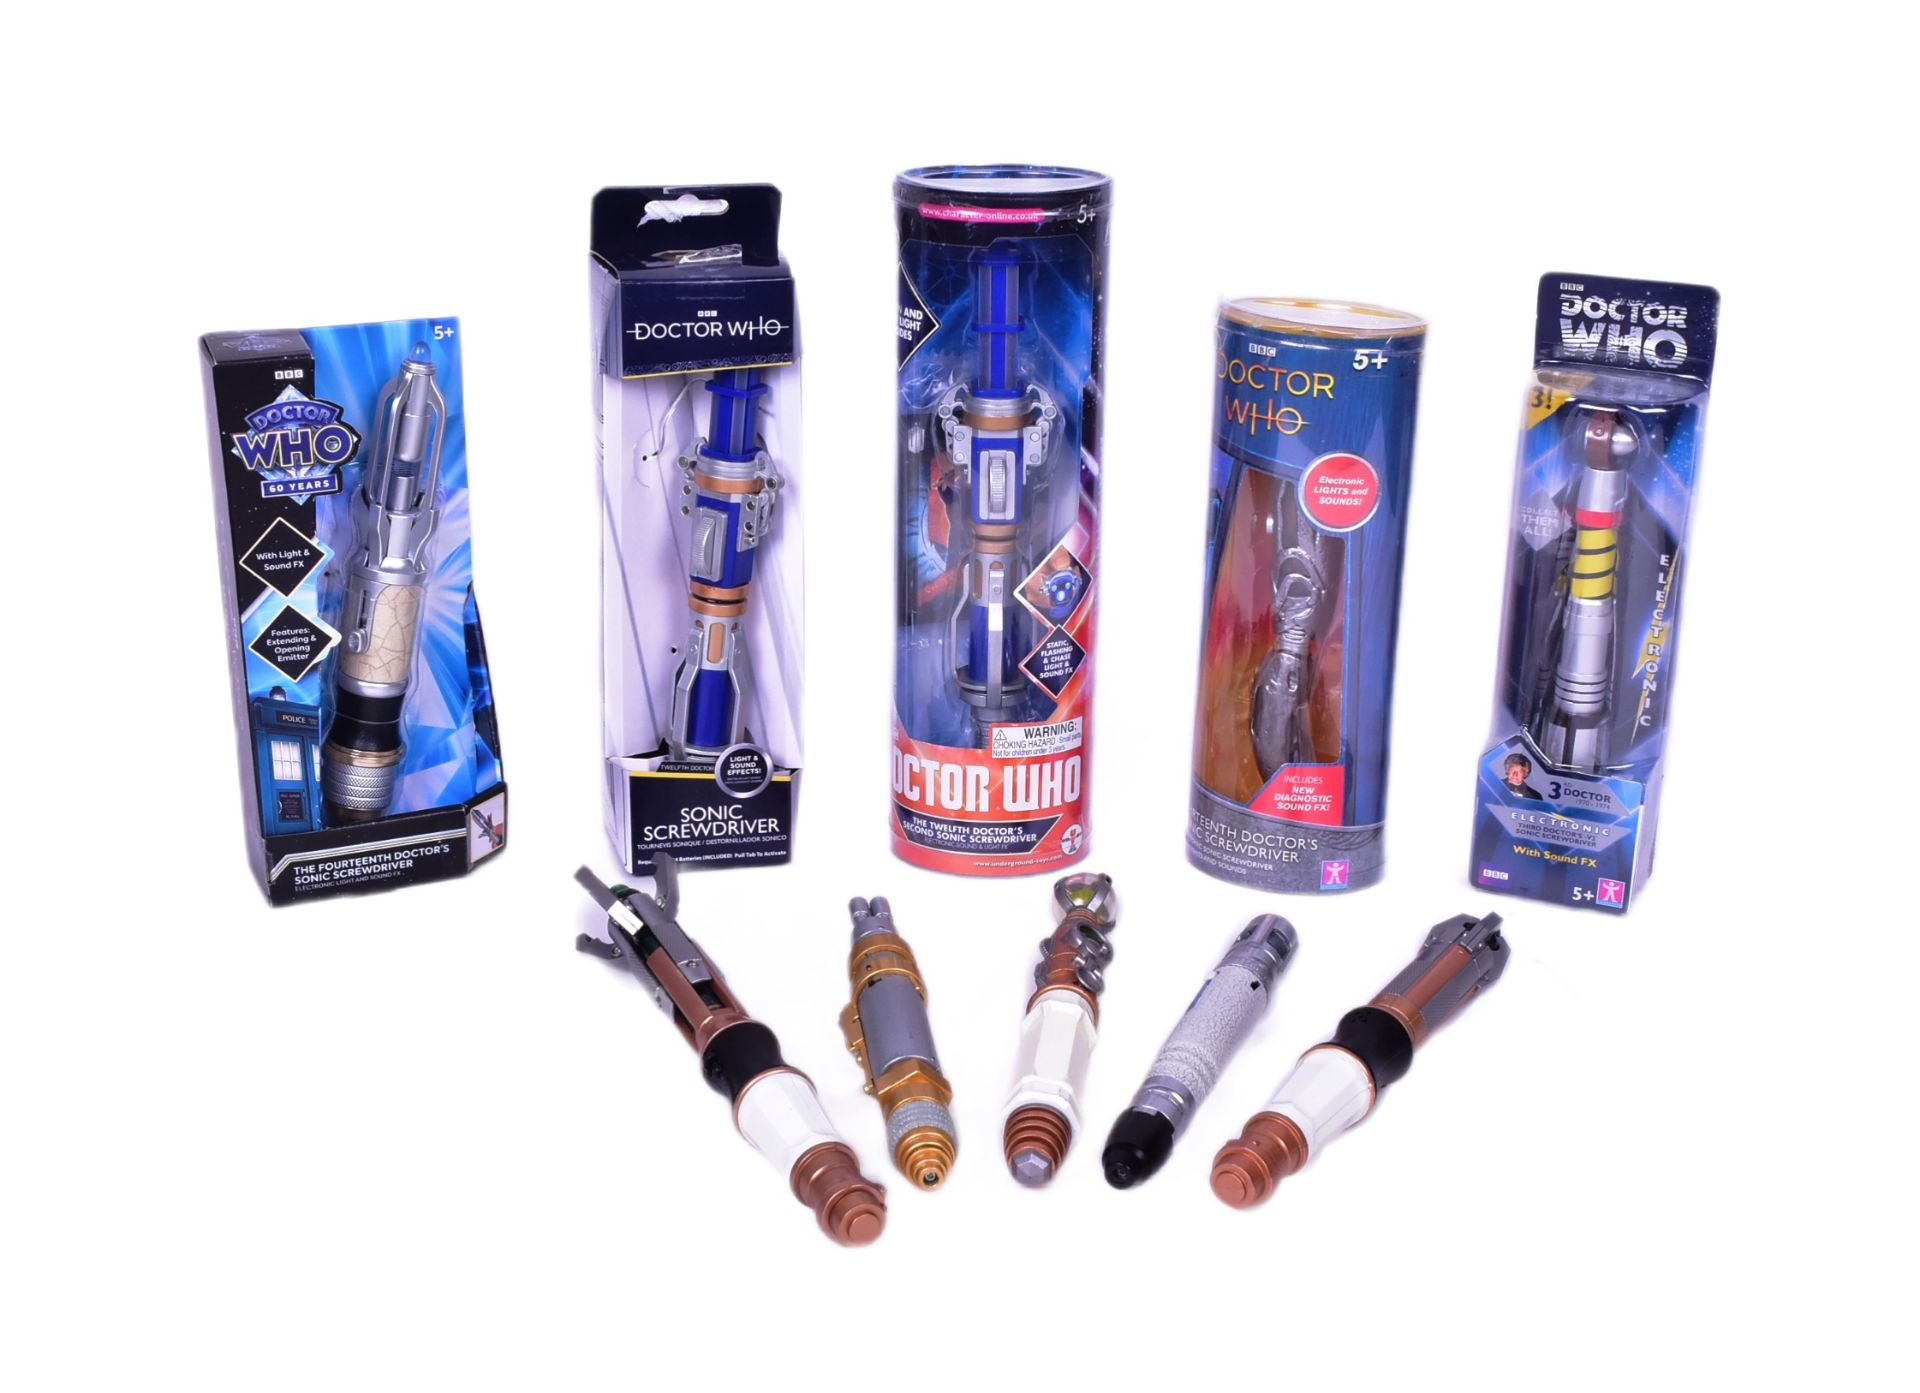 DOCTOR WHO - SONIC SCREWDRIVERS - COLLECTION OF ASSORTED